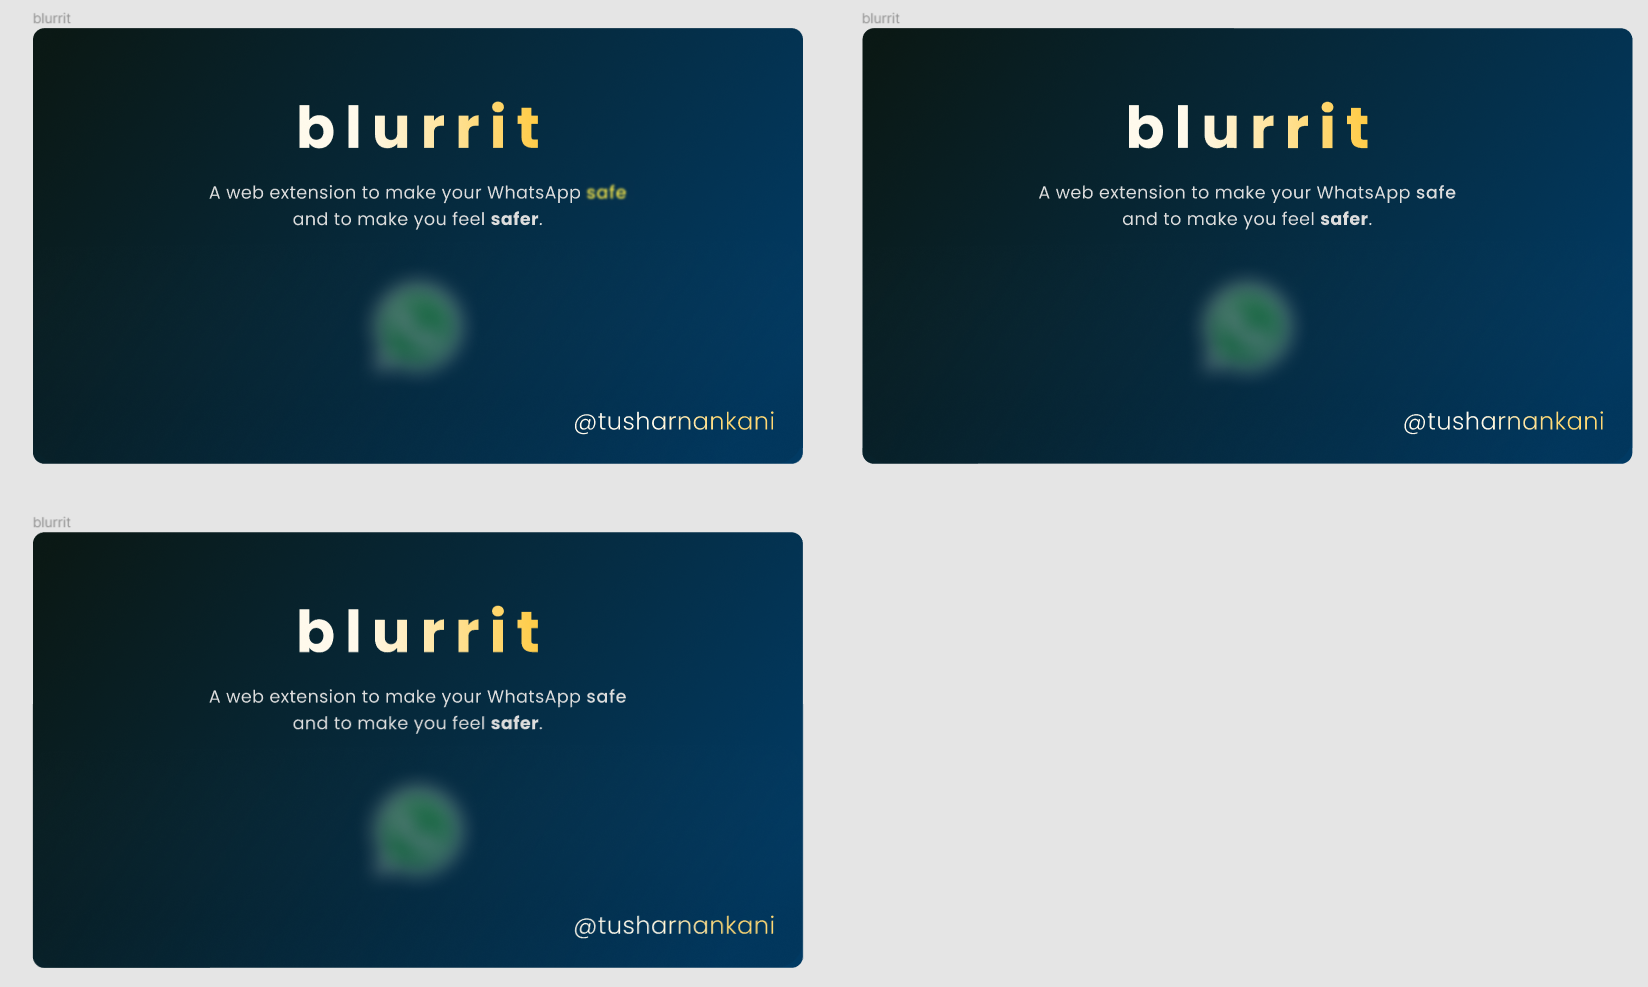 A swapped snippet of the differences of blurrit covers